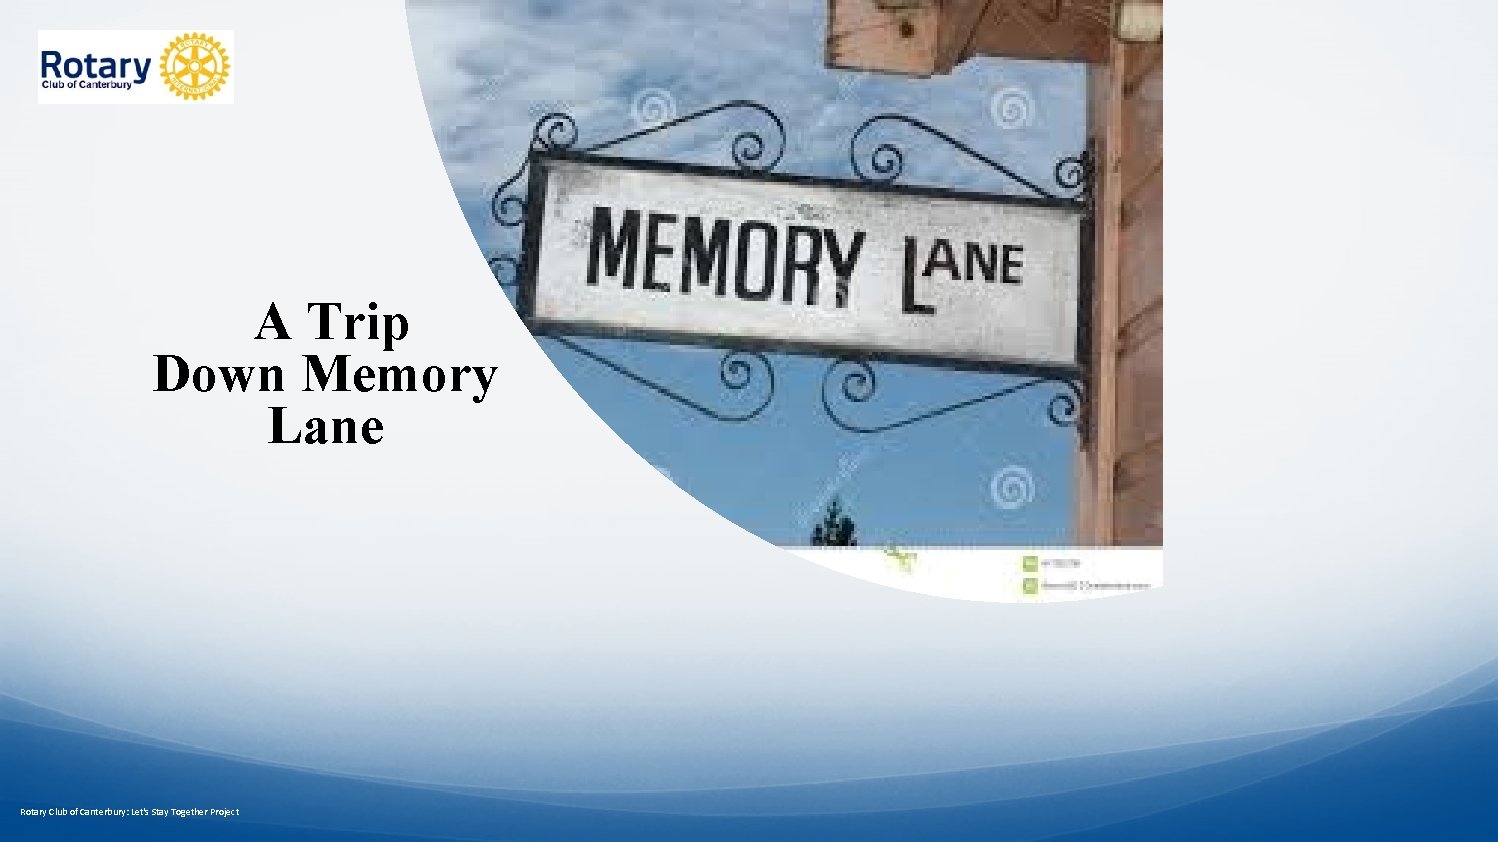 A Trip Down Memory Lane Rotary Club of Canterbury: Let's Stay Together Project 